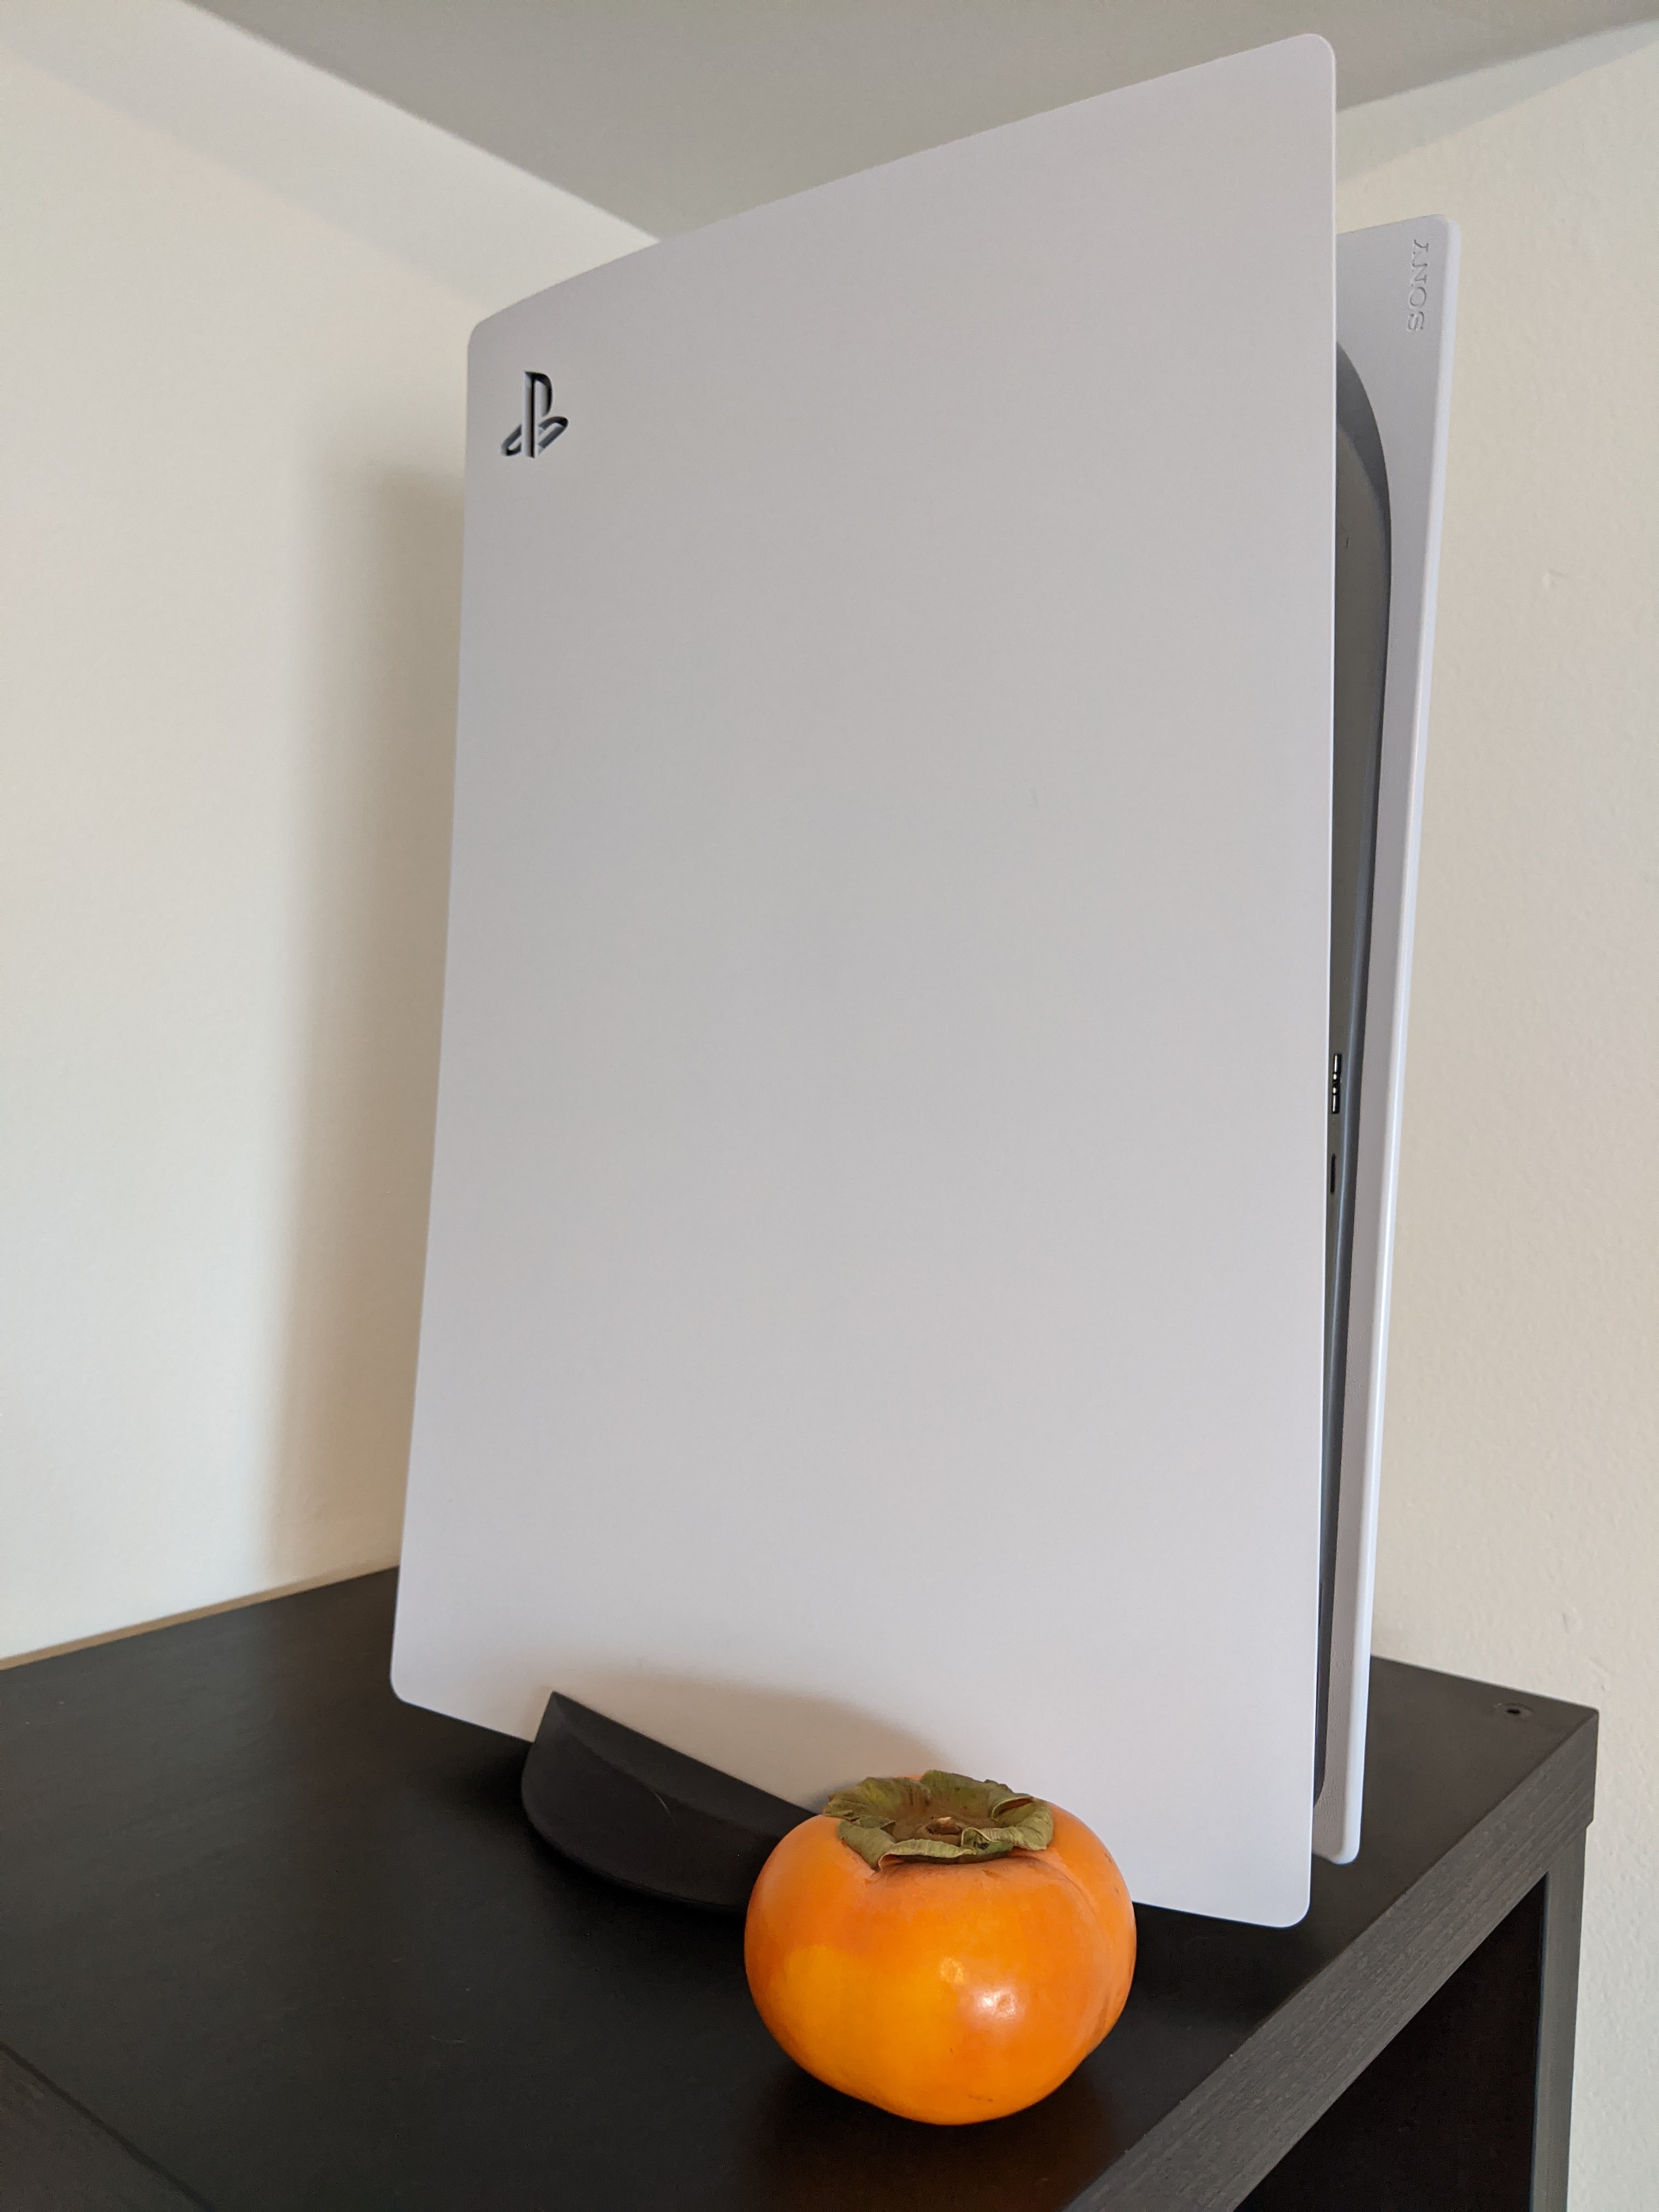 PS5 Next to a Persimmon